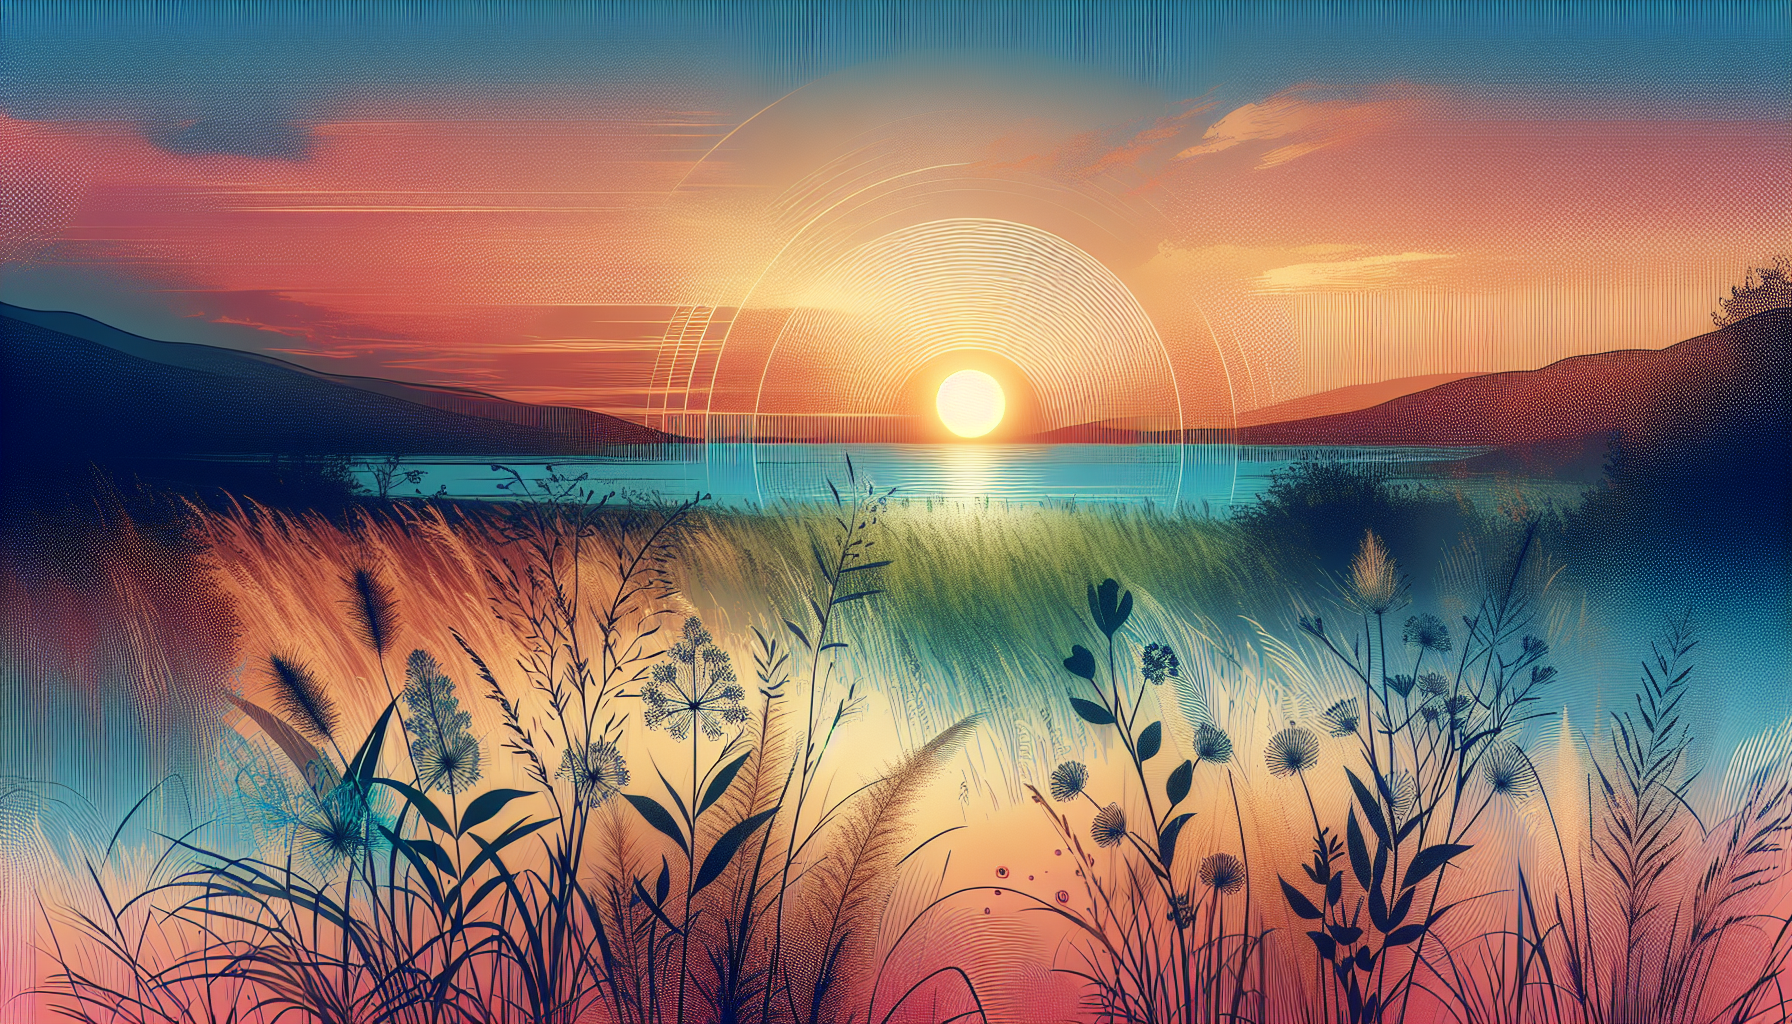 Peaceful landscape depicting a serene meadow under a sunset, with a translucent overlay of the verses from Philippians 4:6-7 elegantly written across the sky.